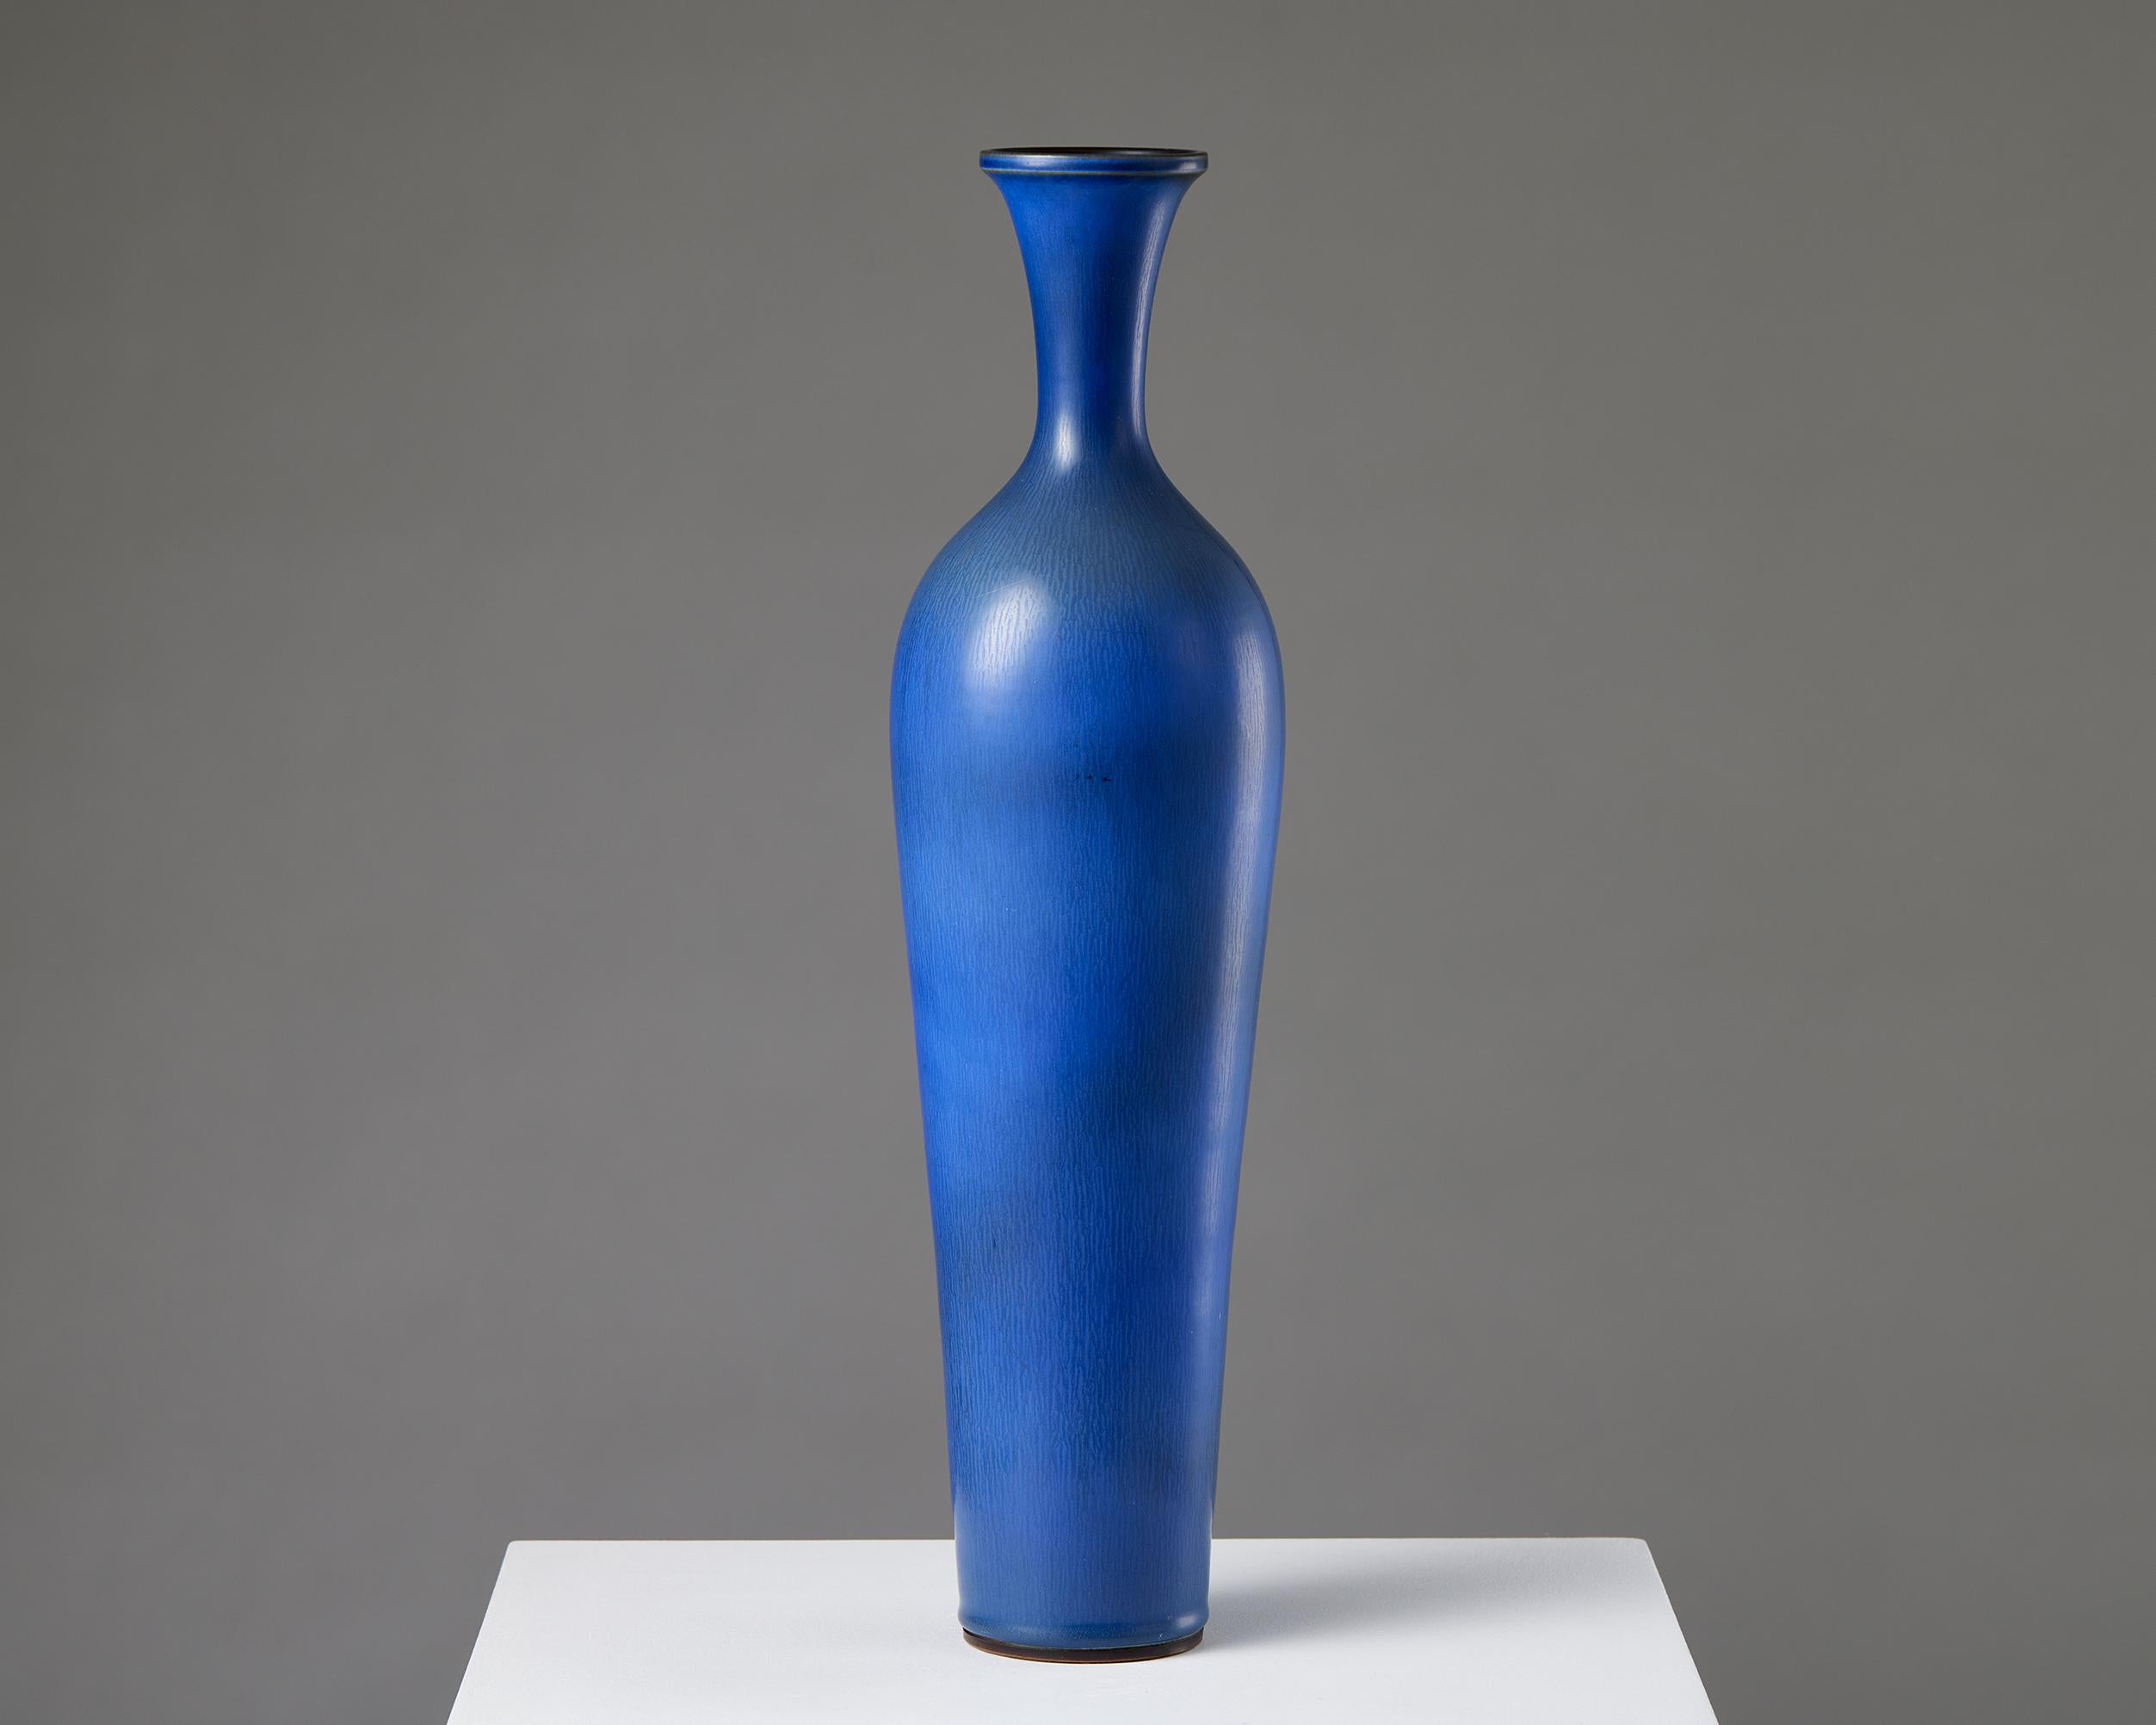 Vase by Berndt Friberg for Gustavsberg,
Sweden, 1956.

Stoneware.

Signed.

H: 47 cm / 18 1/2’’
D: 11 cm / 4 1/2’’

Provenance: From a private Swedish collection.

Berndt Friberg was born in the southern Sweden town of Hoganas. He came from a long